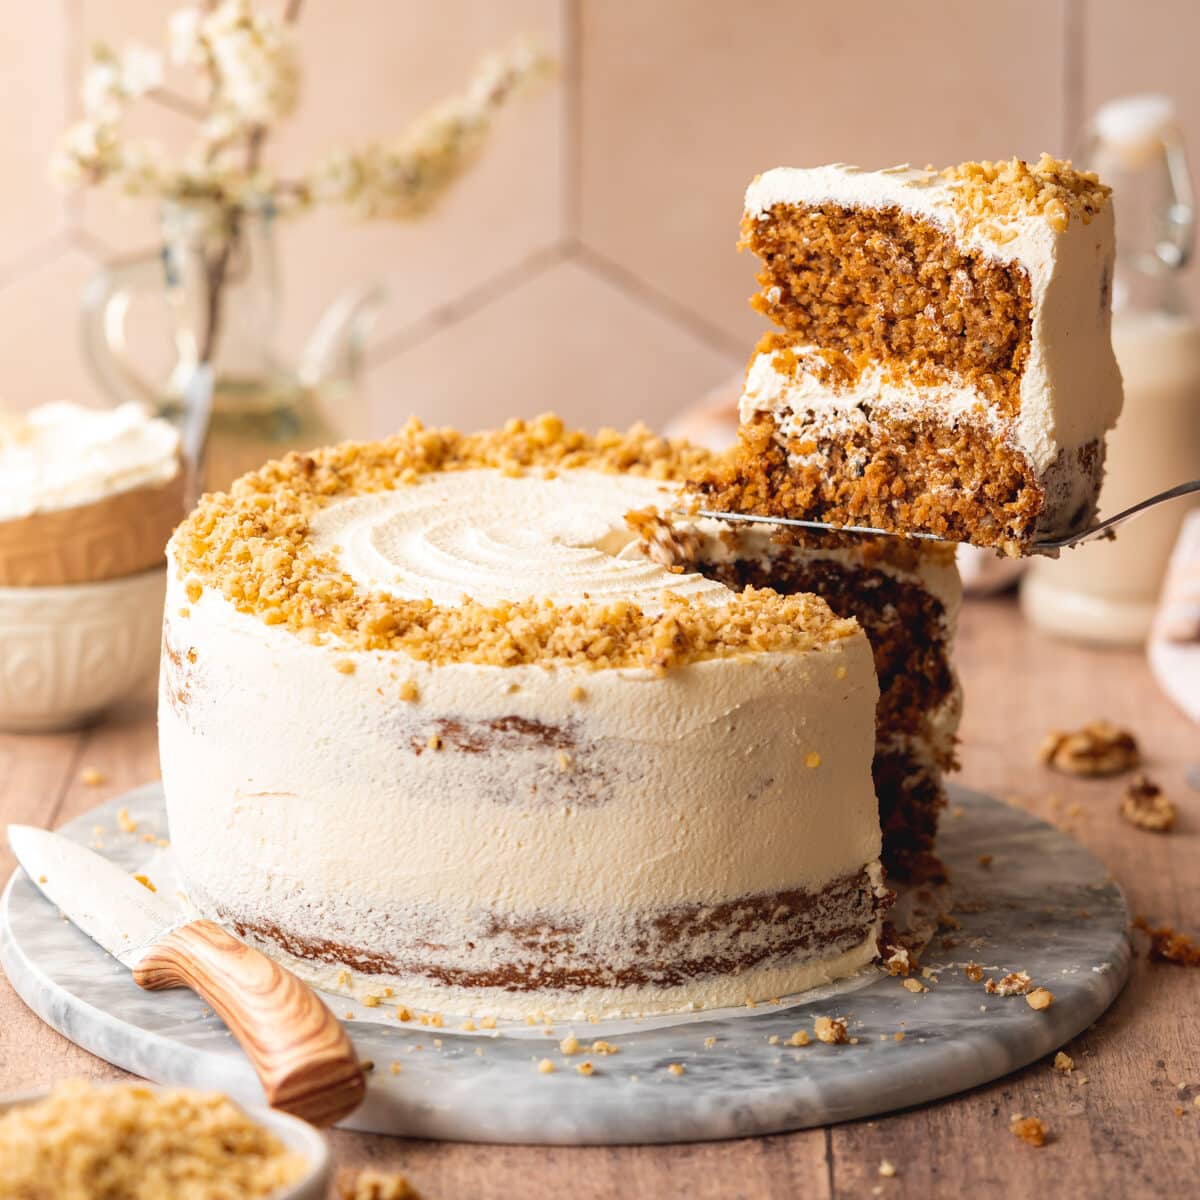 layered vegan carrot cake with dairy-free cream cheese frosting on a plate.